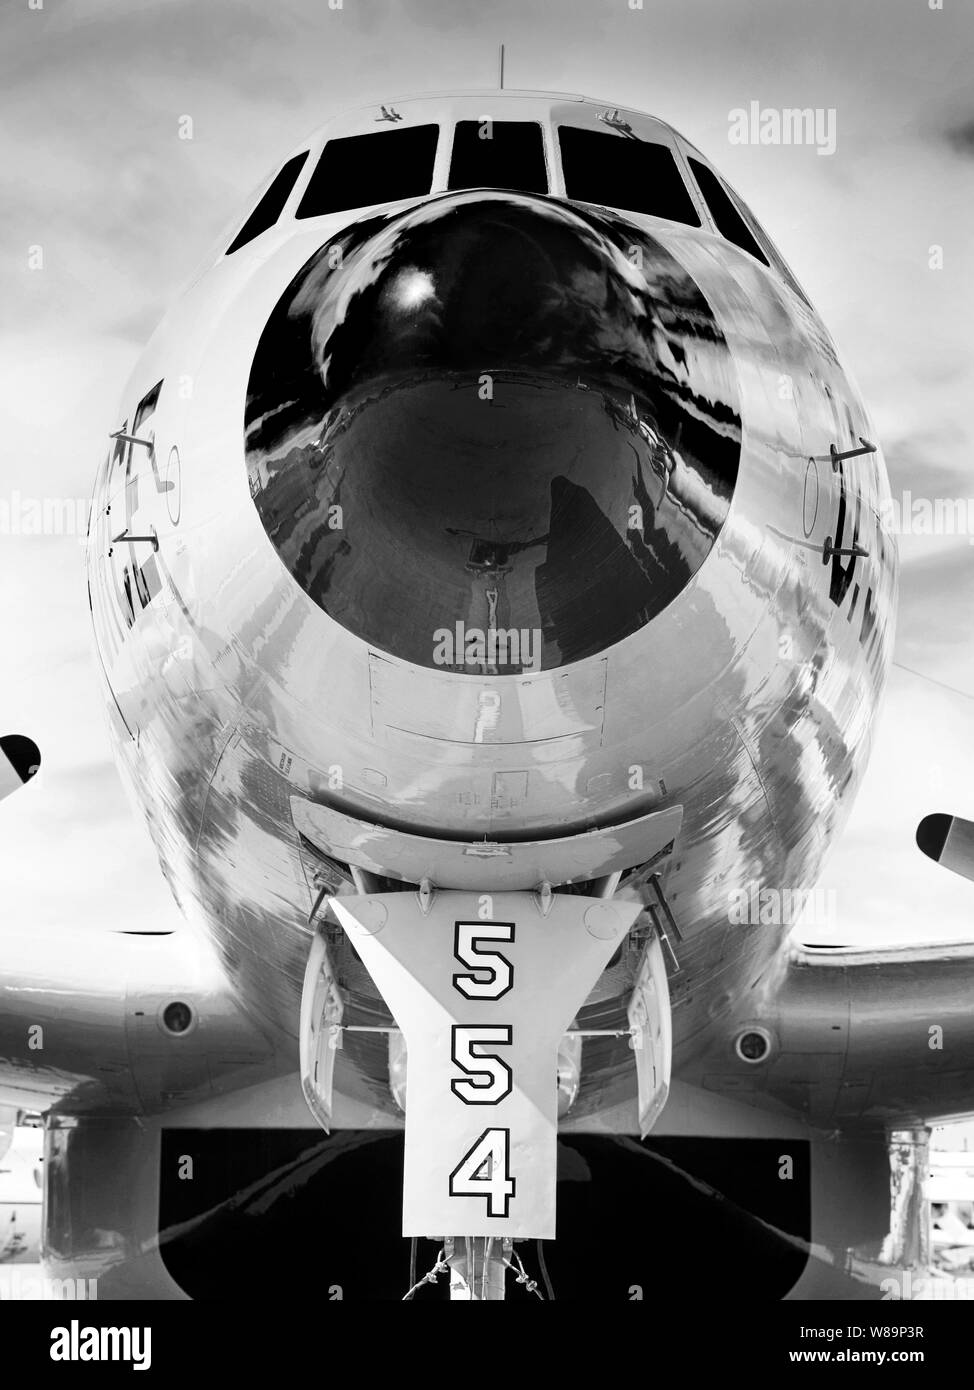 The nose and cockpit of a Lockheed EC-121T Warning Star AEW Plane of the USAF Stock Photo